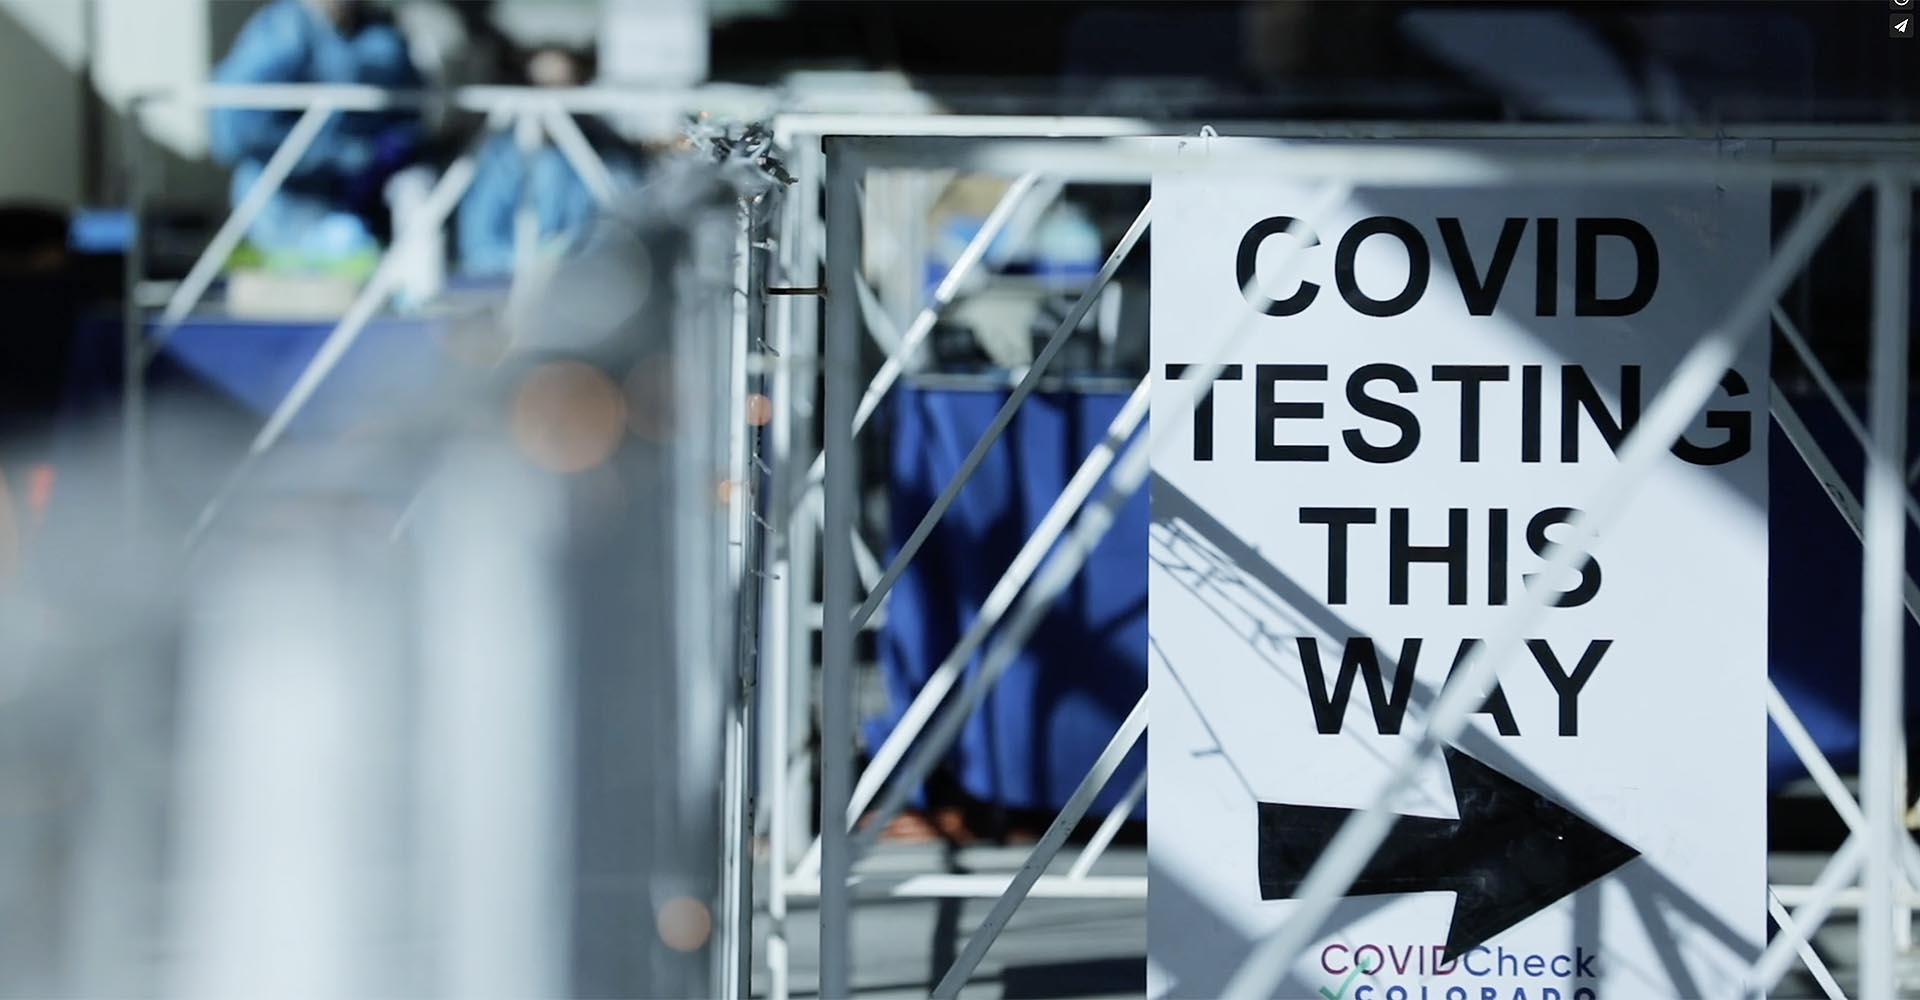 VIDEO: In a positive sign, demand for Covid tests eases. But health experts warn against complacency